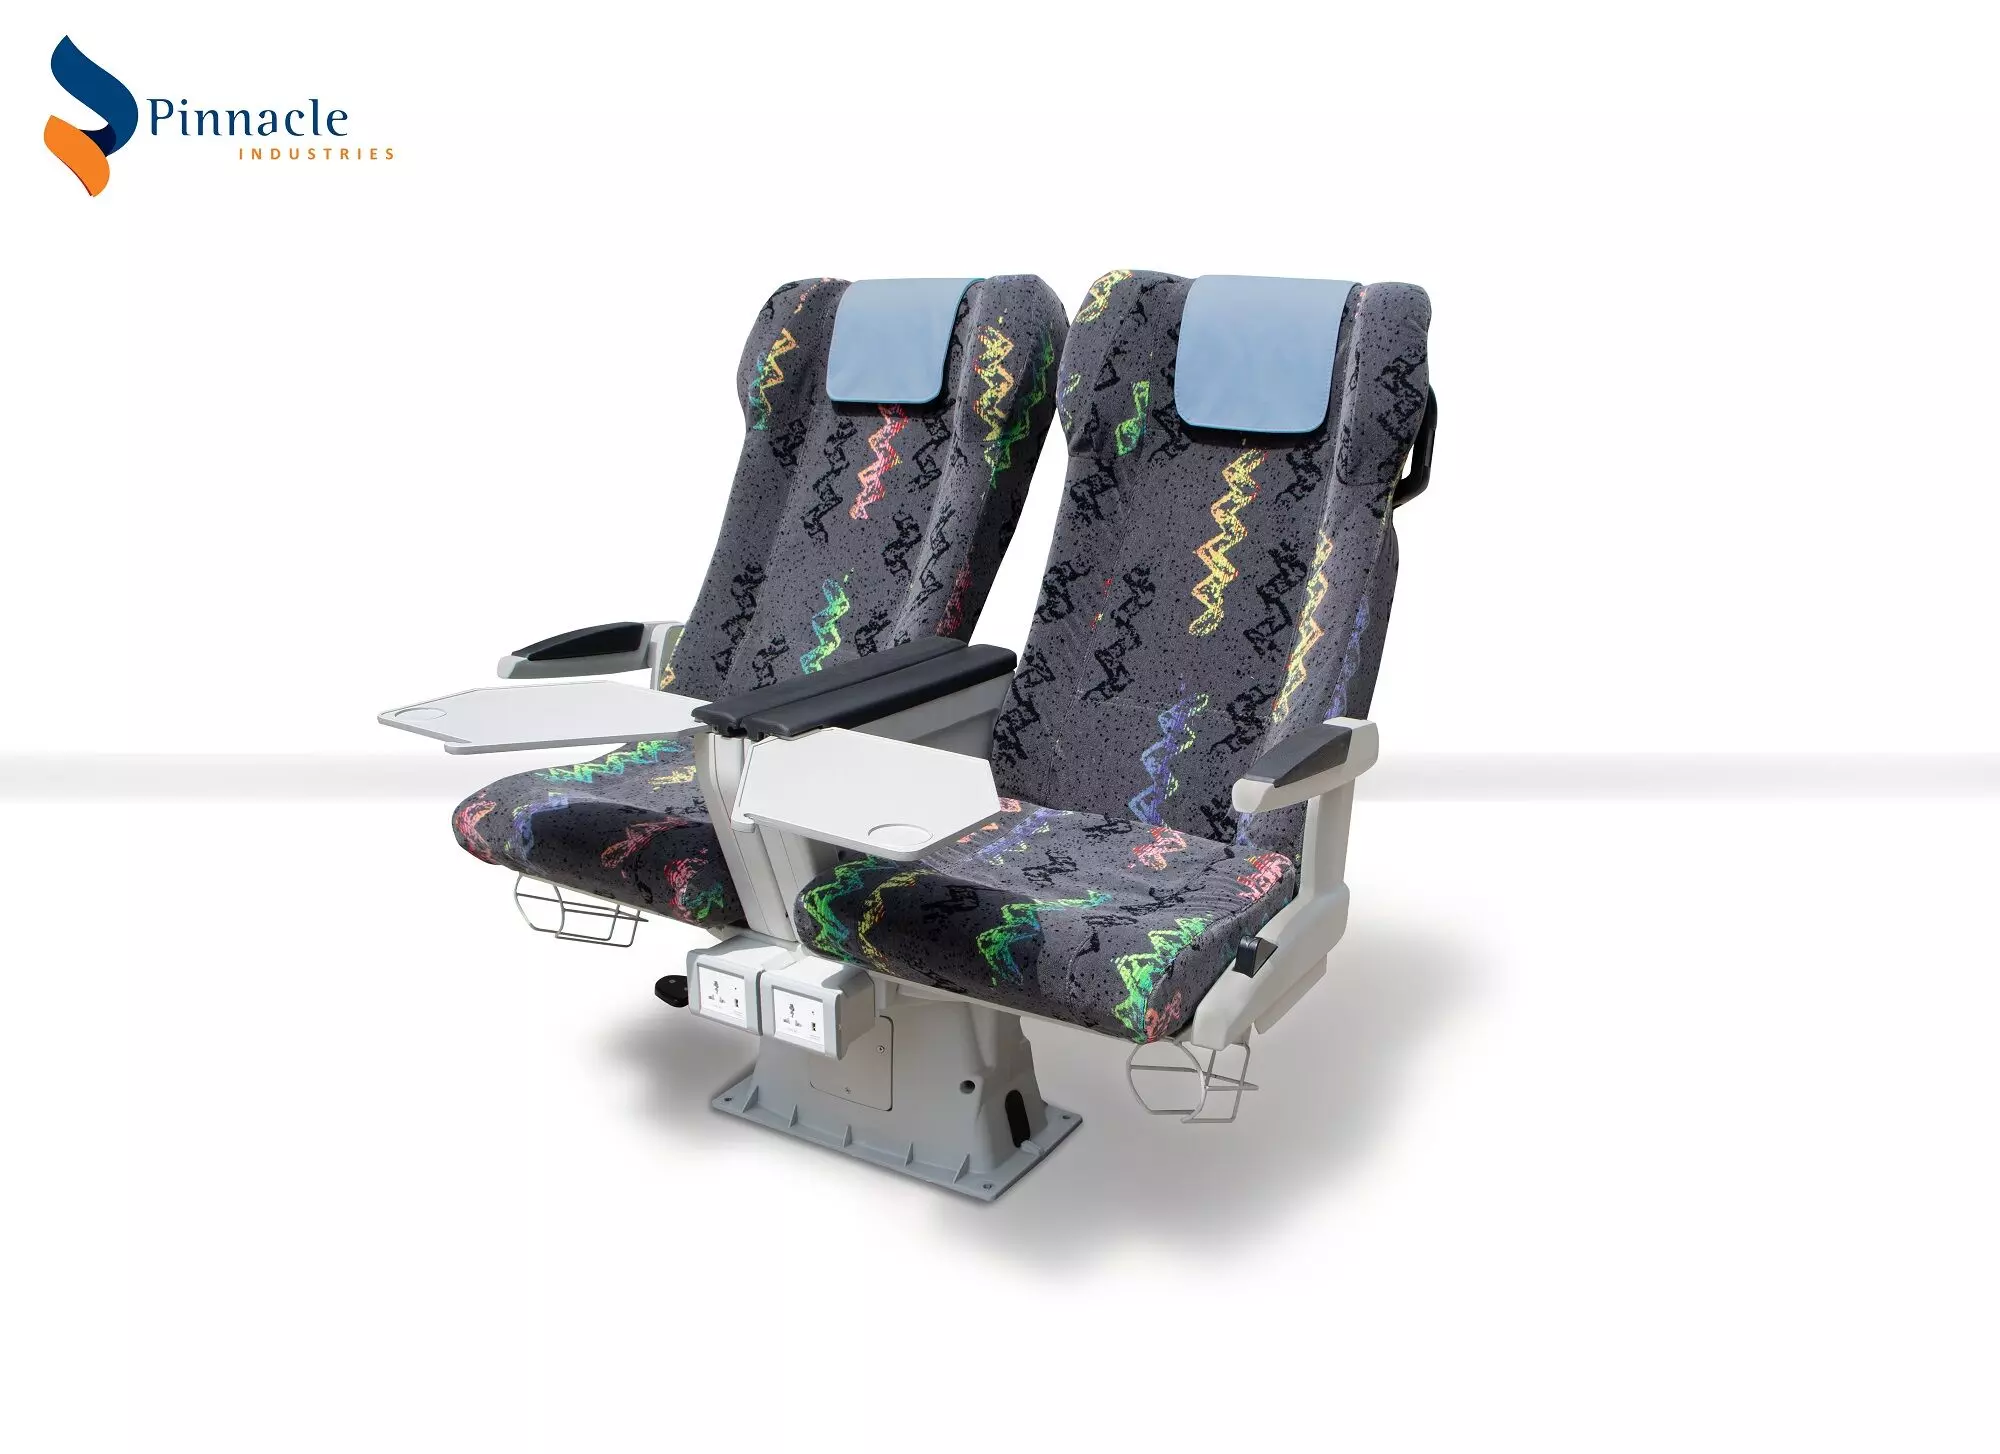 Pinnacle Industries introduces ergonomically designed seating for Vande Bharat Express